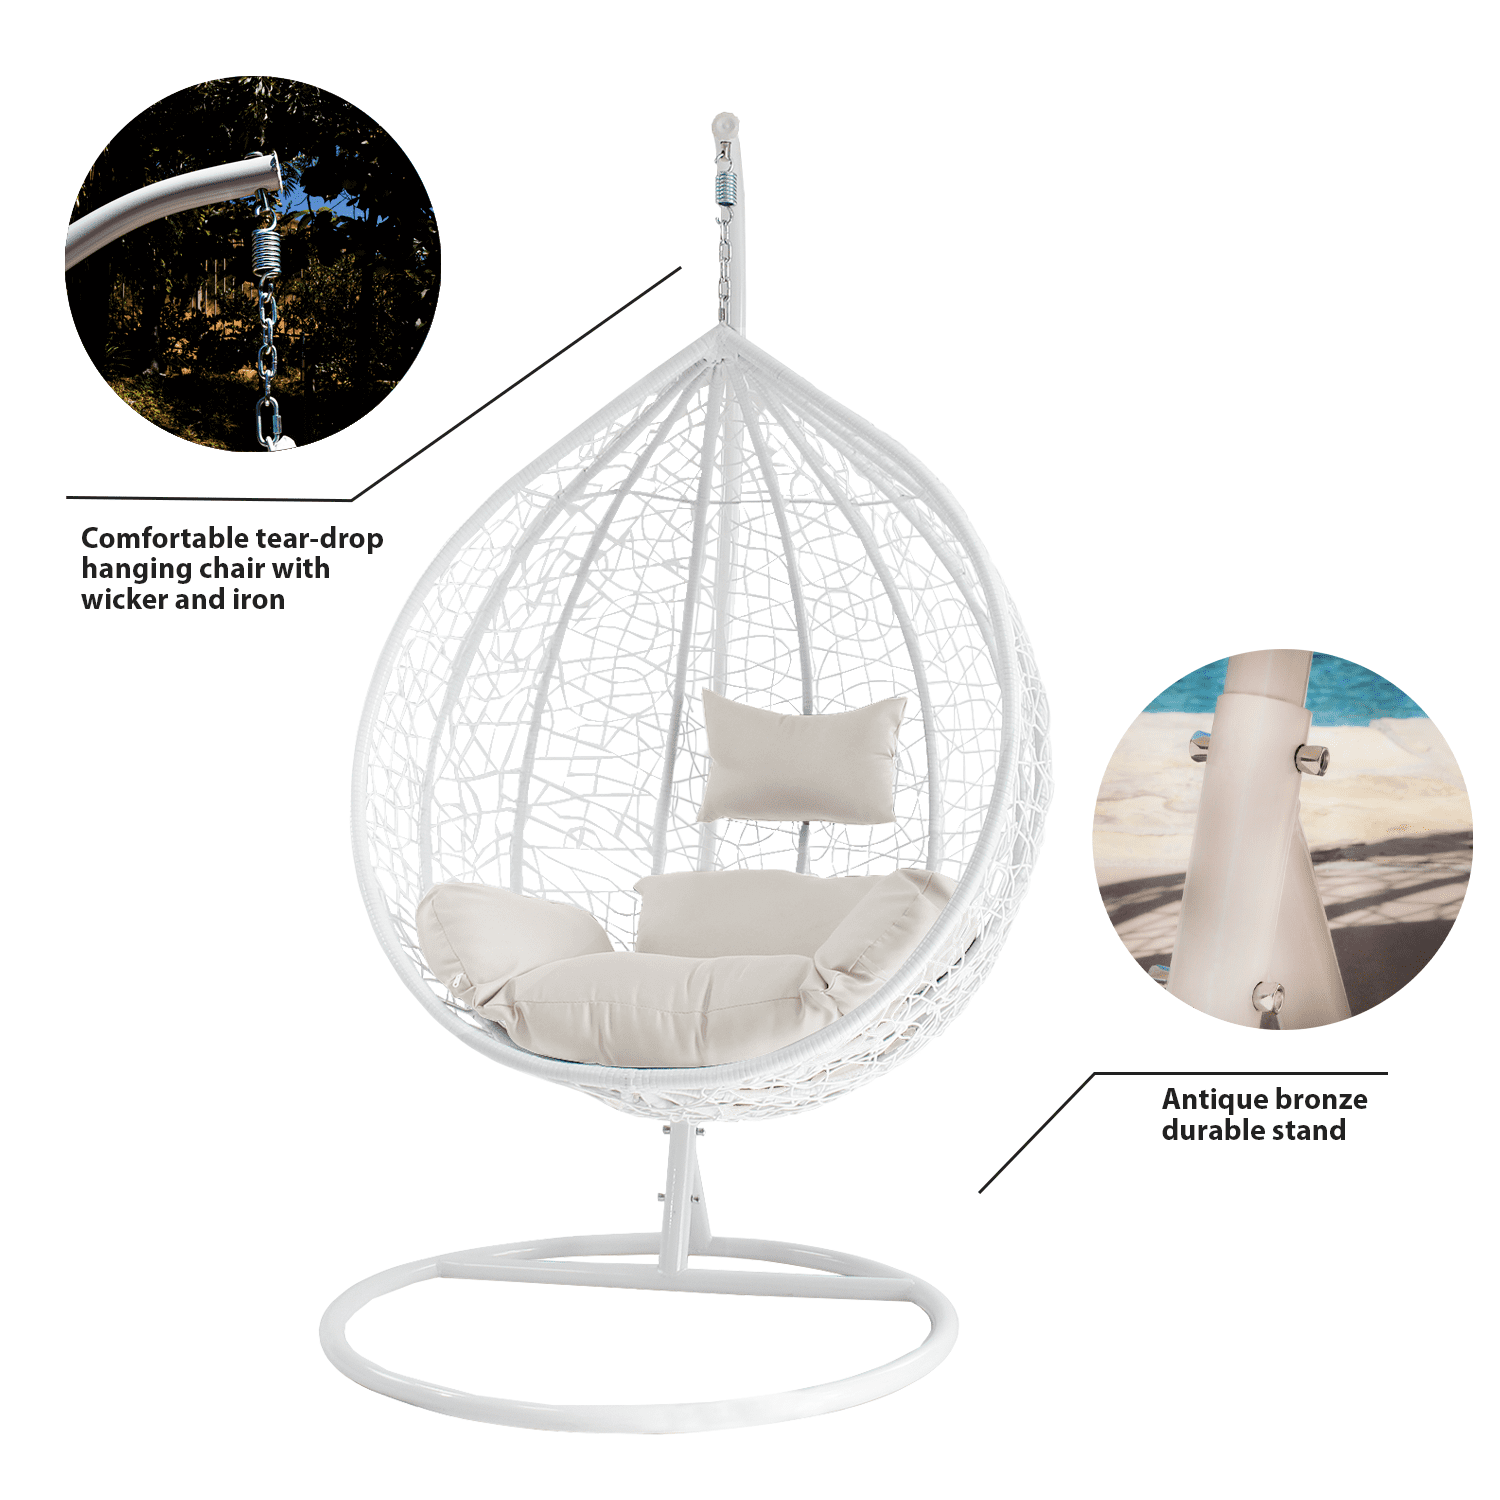 Bij wet Roest privacy Décor Patio Swing Chair Home Decor Outdoor Wicker Plastic Snow White Nest  Tear Drop Swing Lounge Chair with Ashes Gray Cushion & Support Frame -  Walmart.com